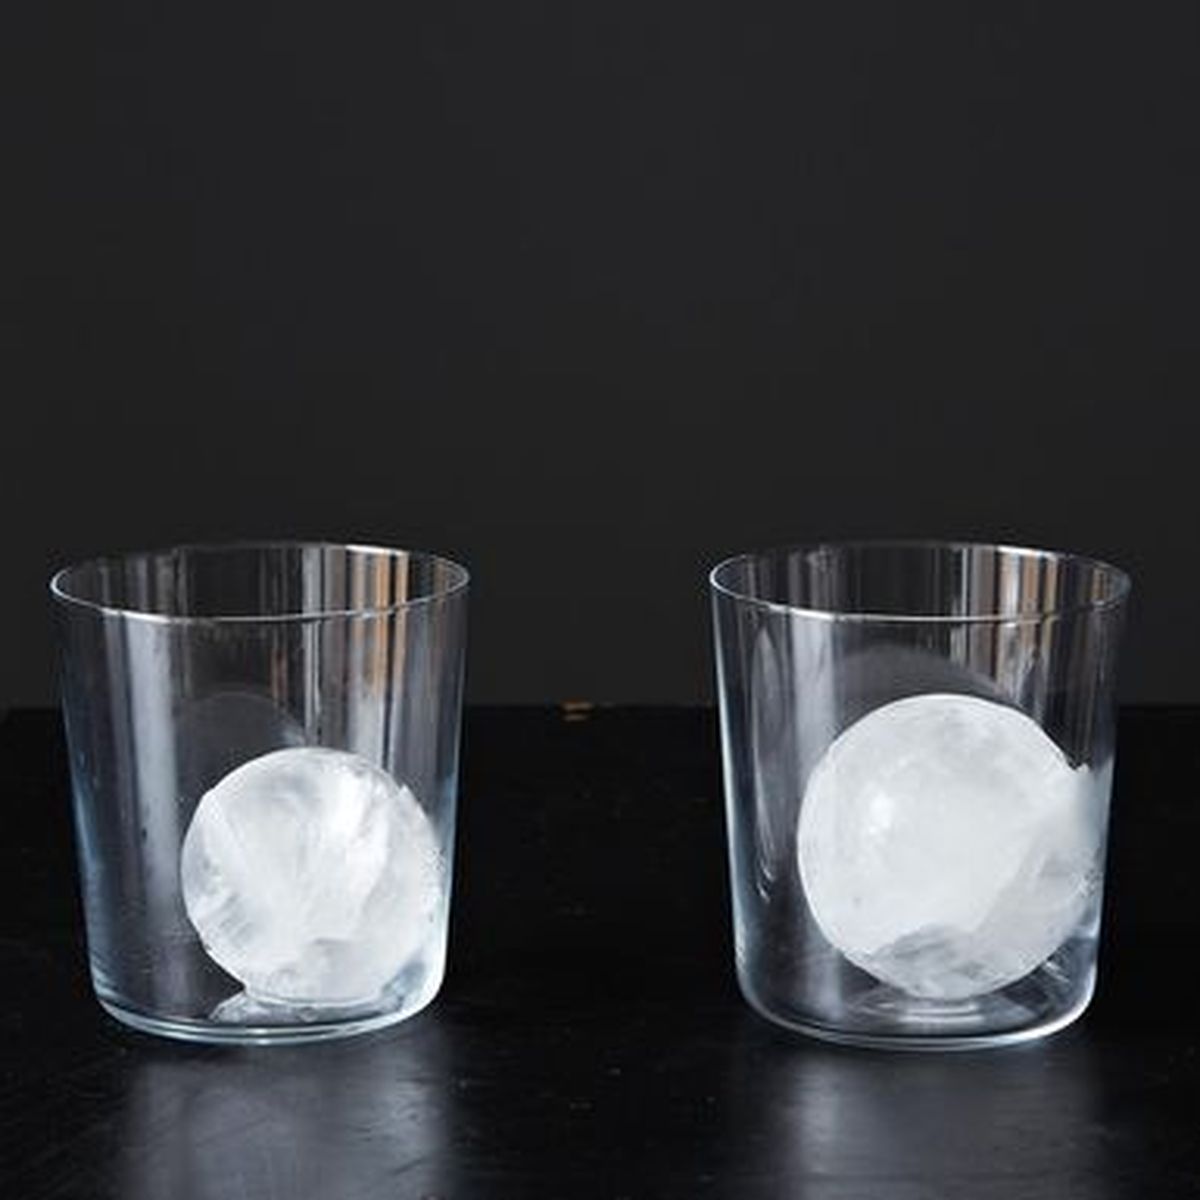 Why the Shape and Size of Your Ice Matters for Cocktails